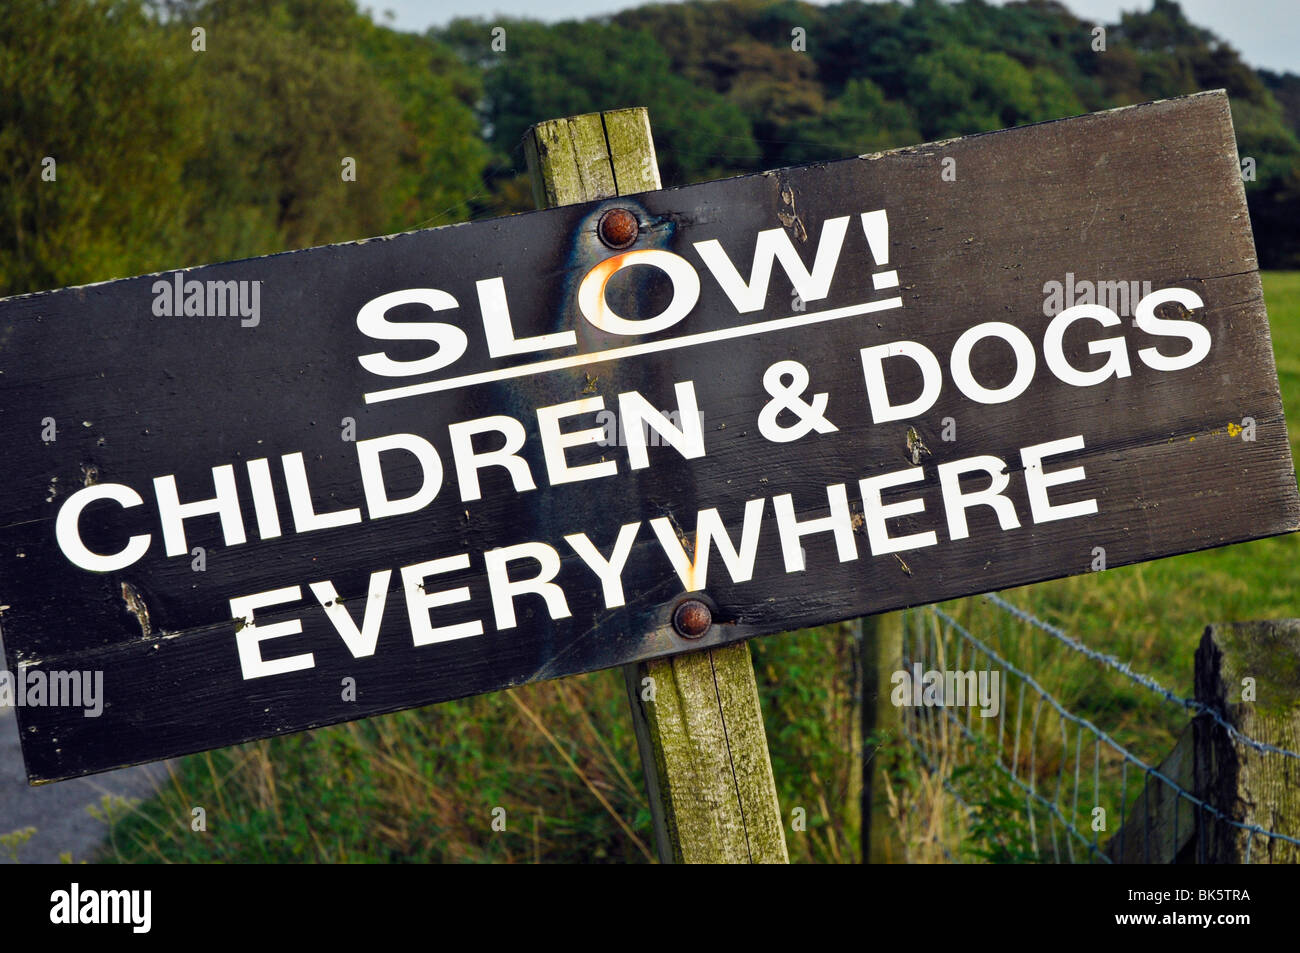 Slow! Children and dogs everywhere sign in Bleasdale, Lancashire, England Stock Photo